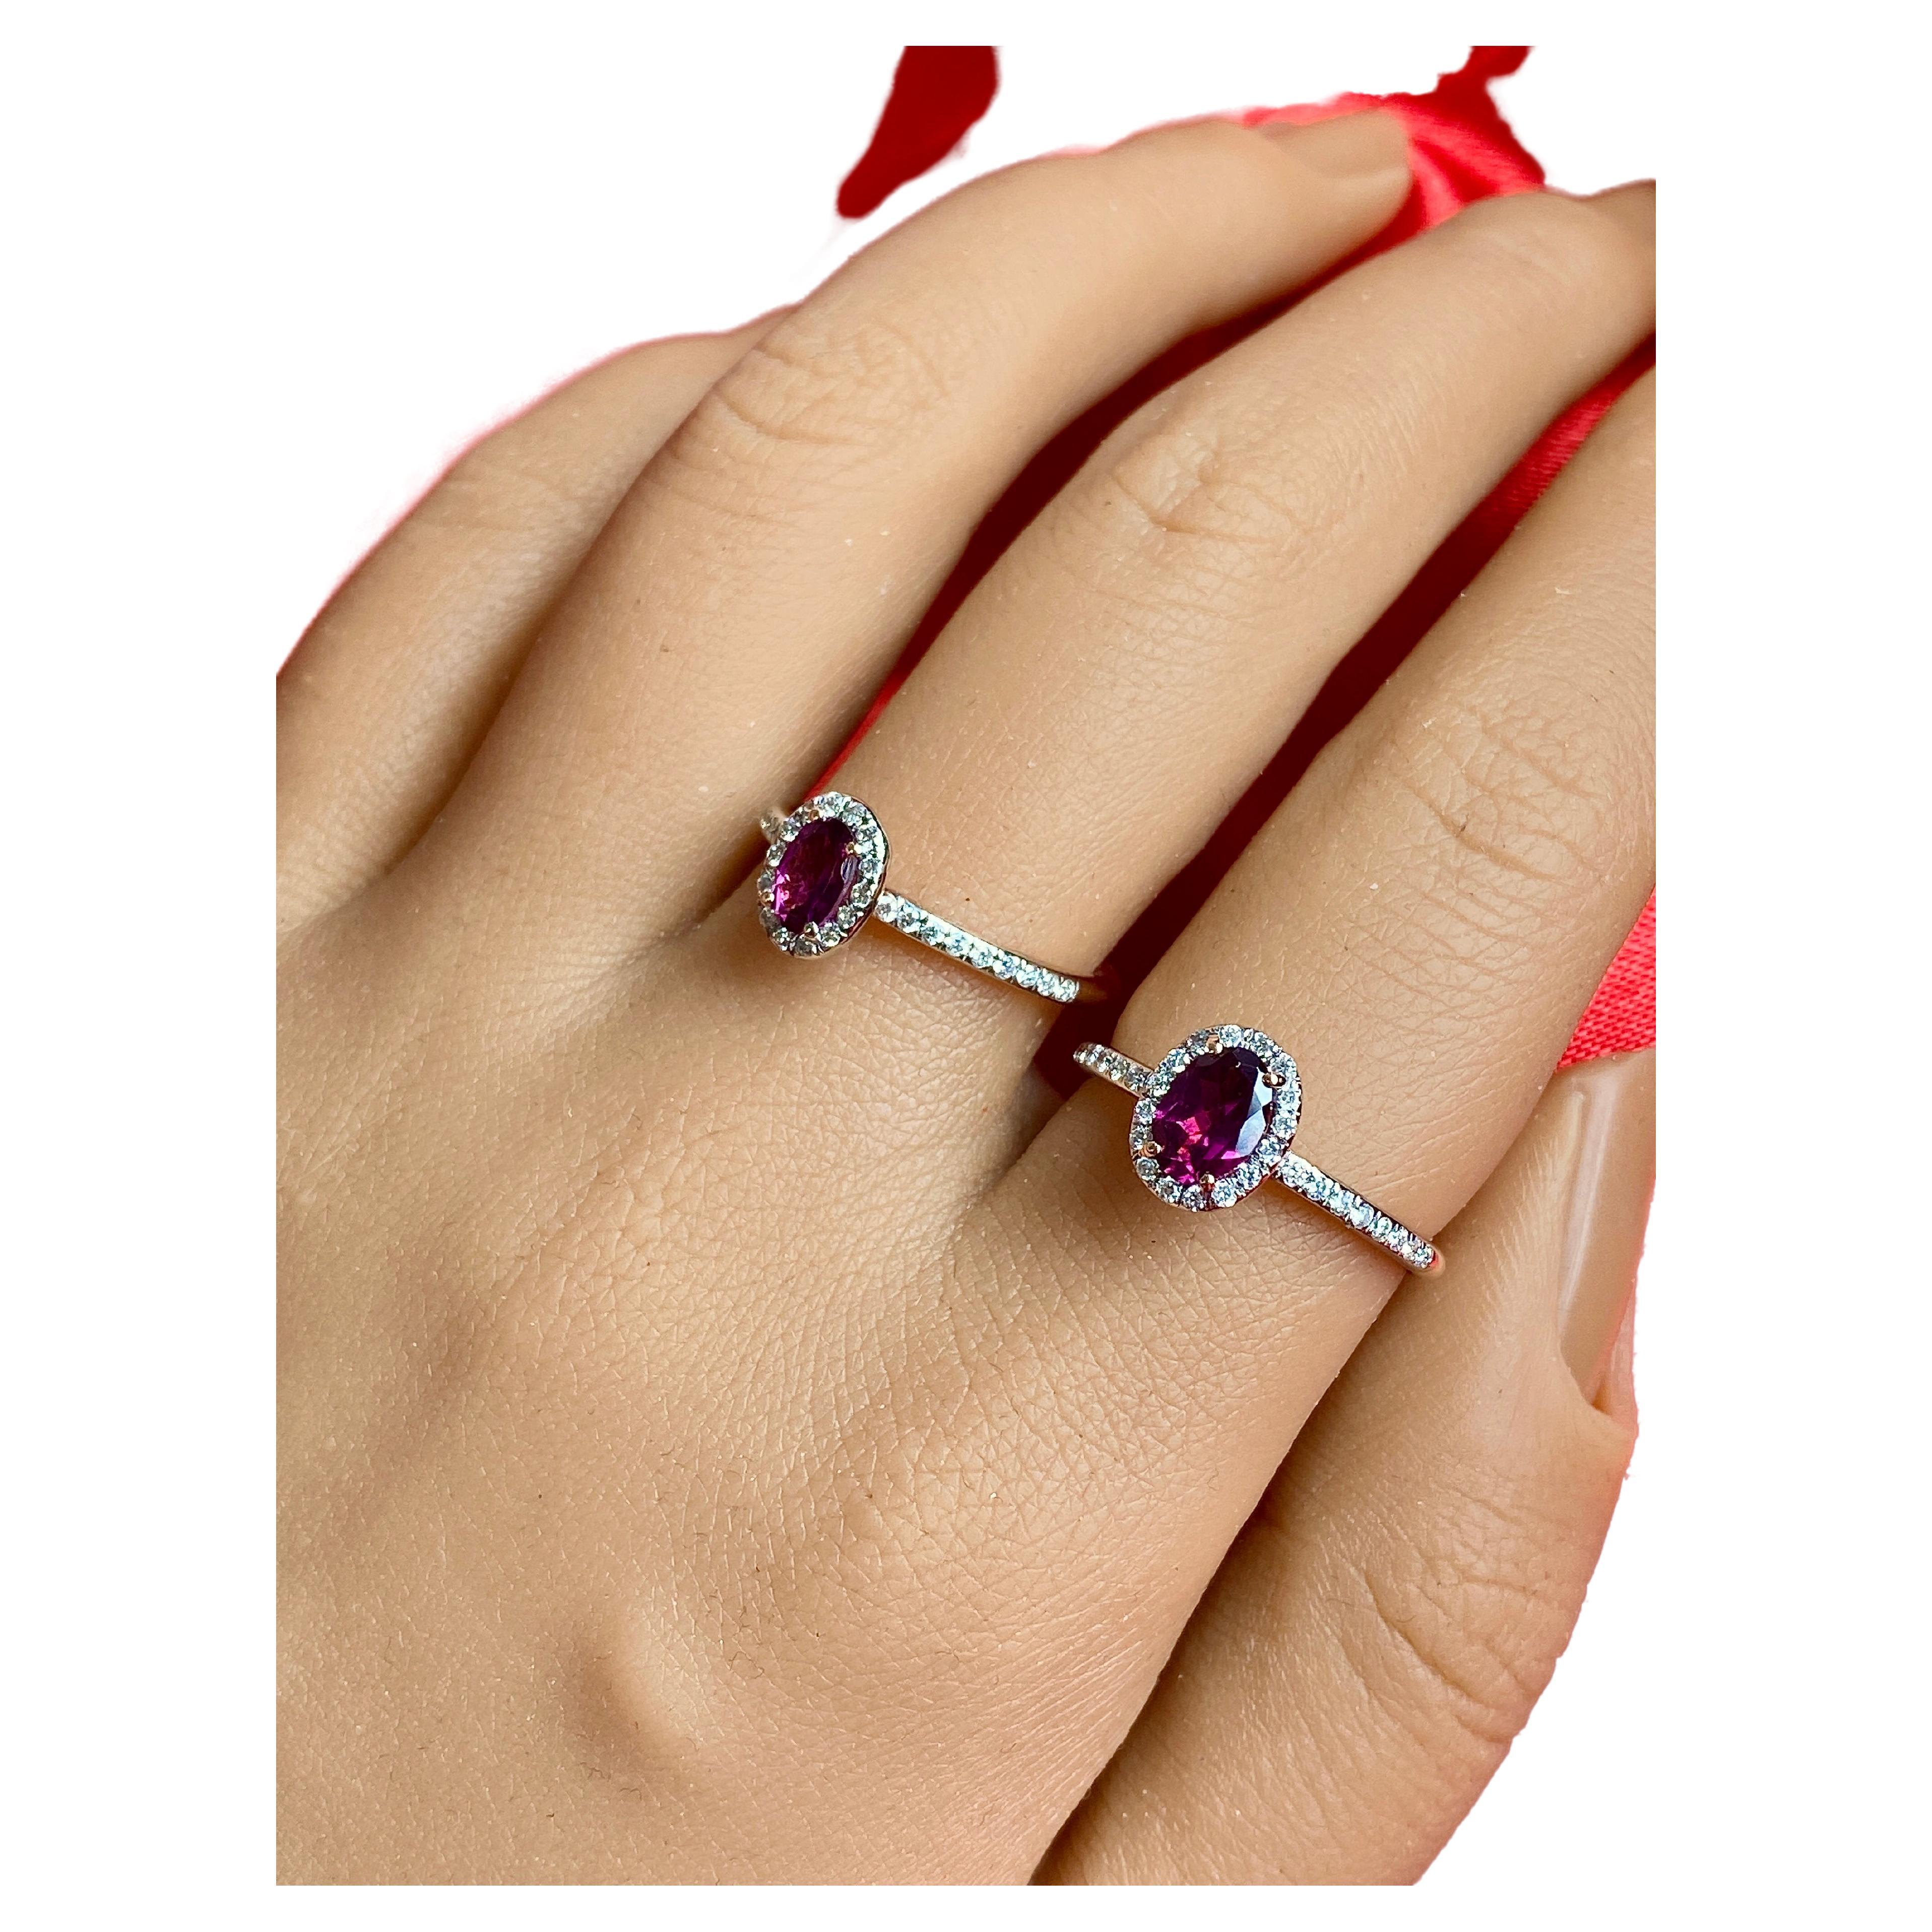 For Sale:  Gemstone Solitaire Ring Stack, 14k Solid Gold Rings with Natural Round Diamonds